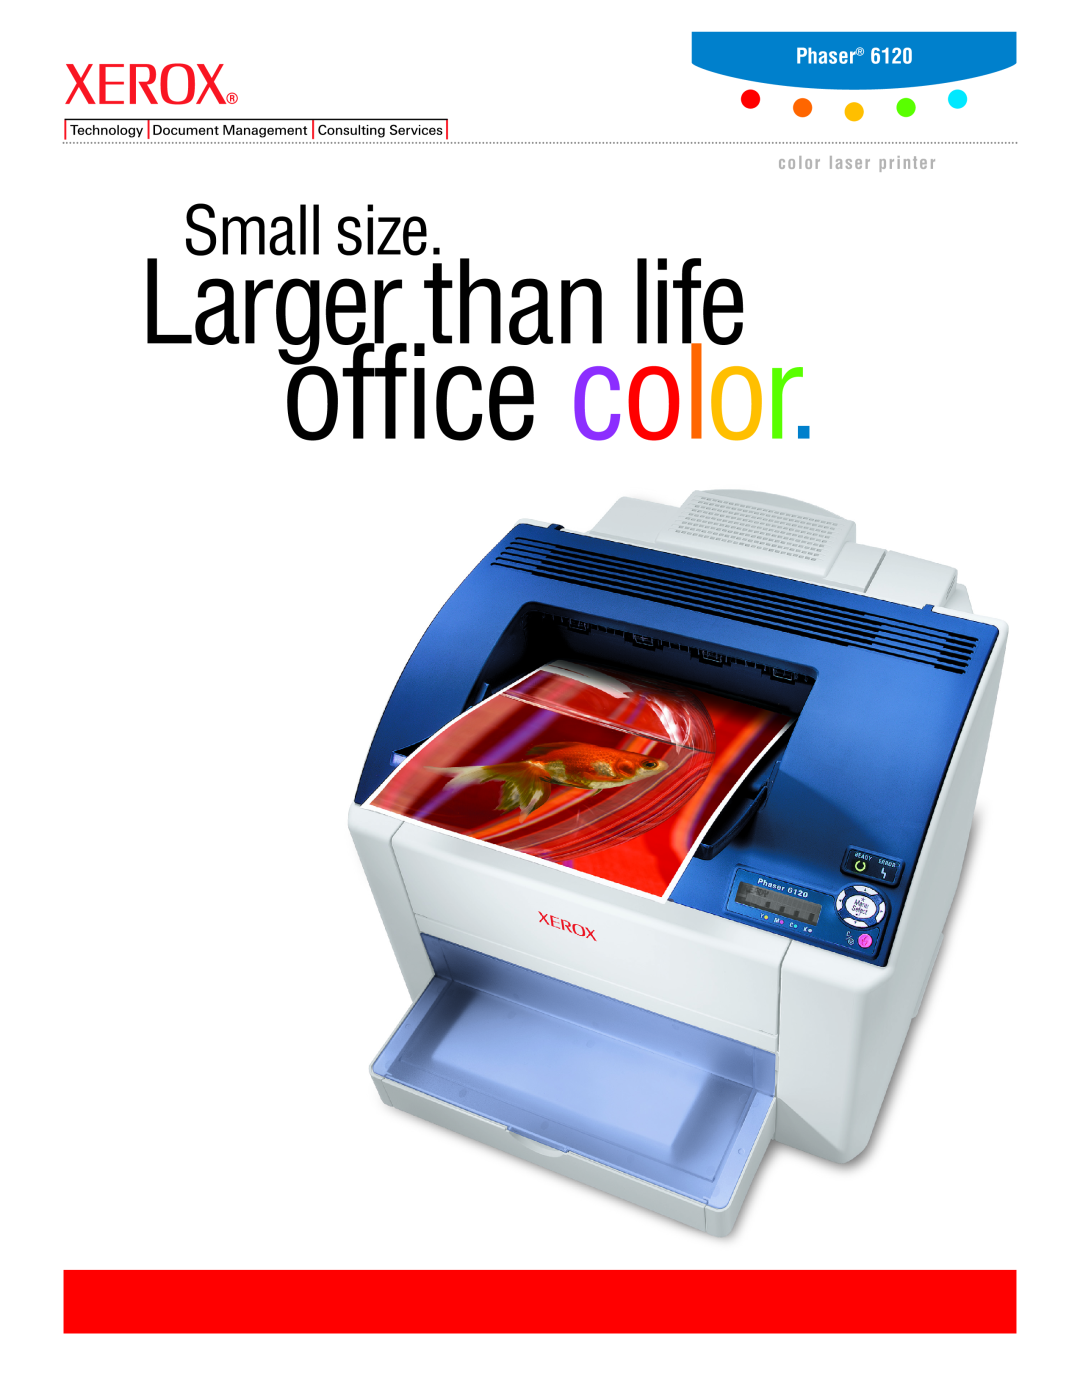 Xerox 6120N manual Phaser, office color, Larger than life, Small size, color laser printer 